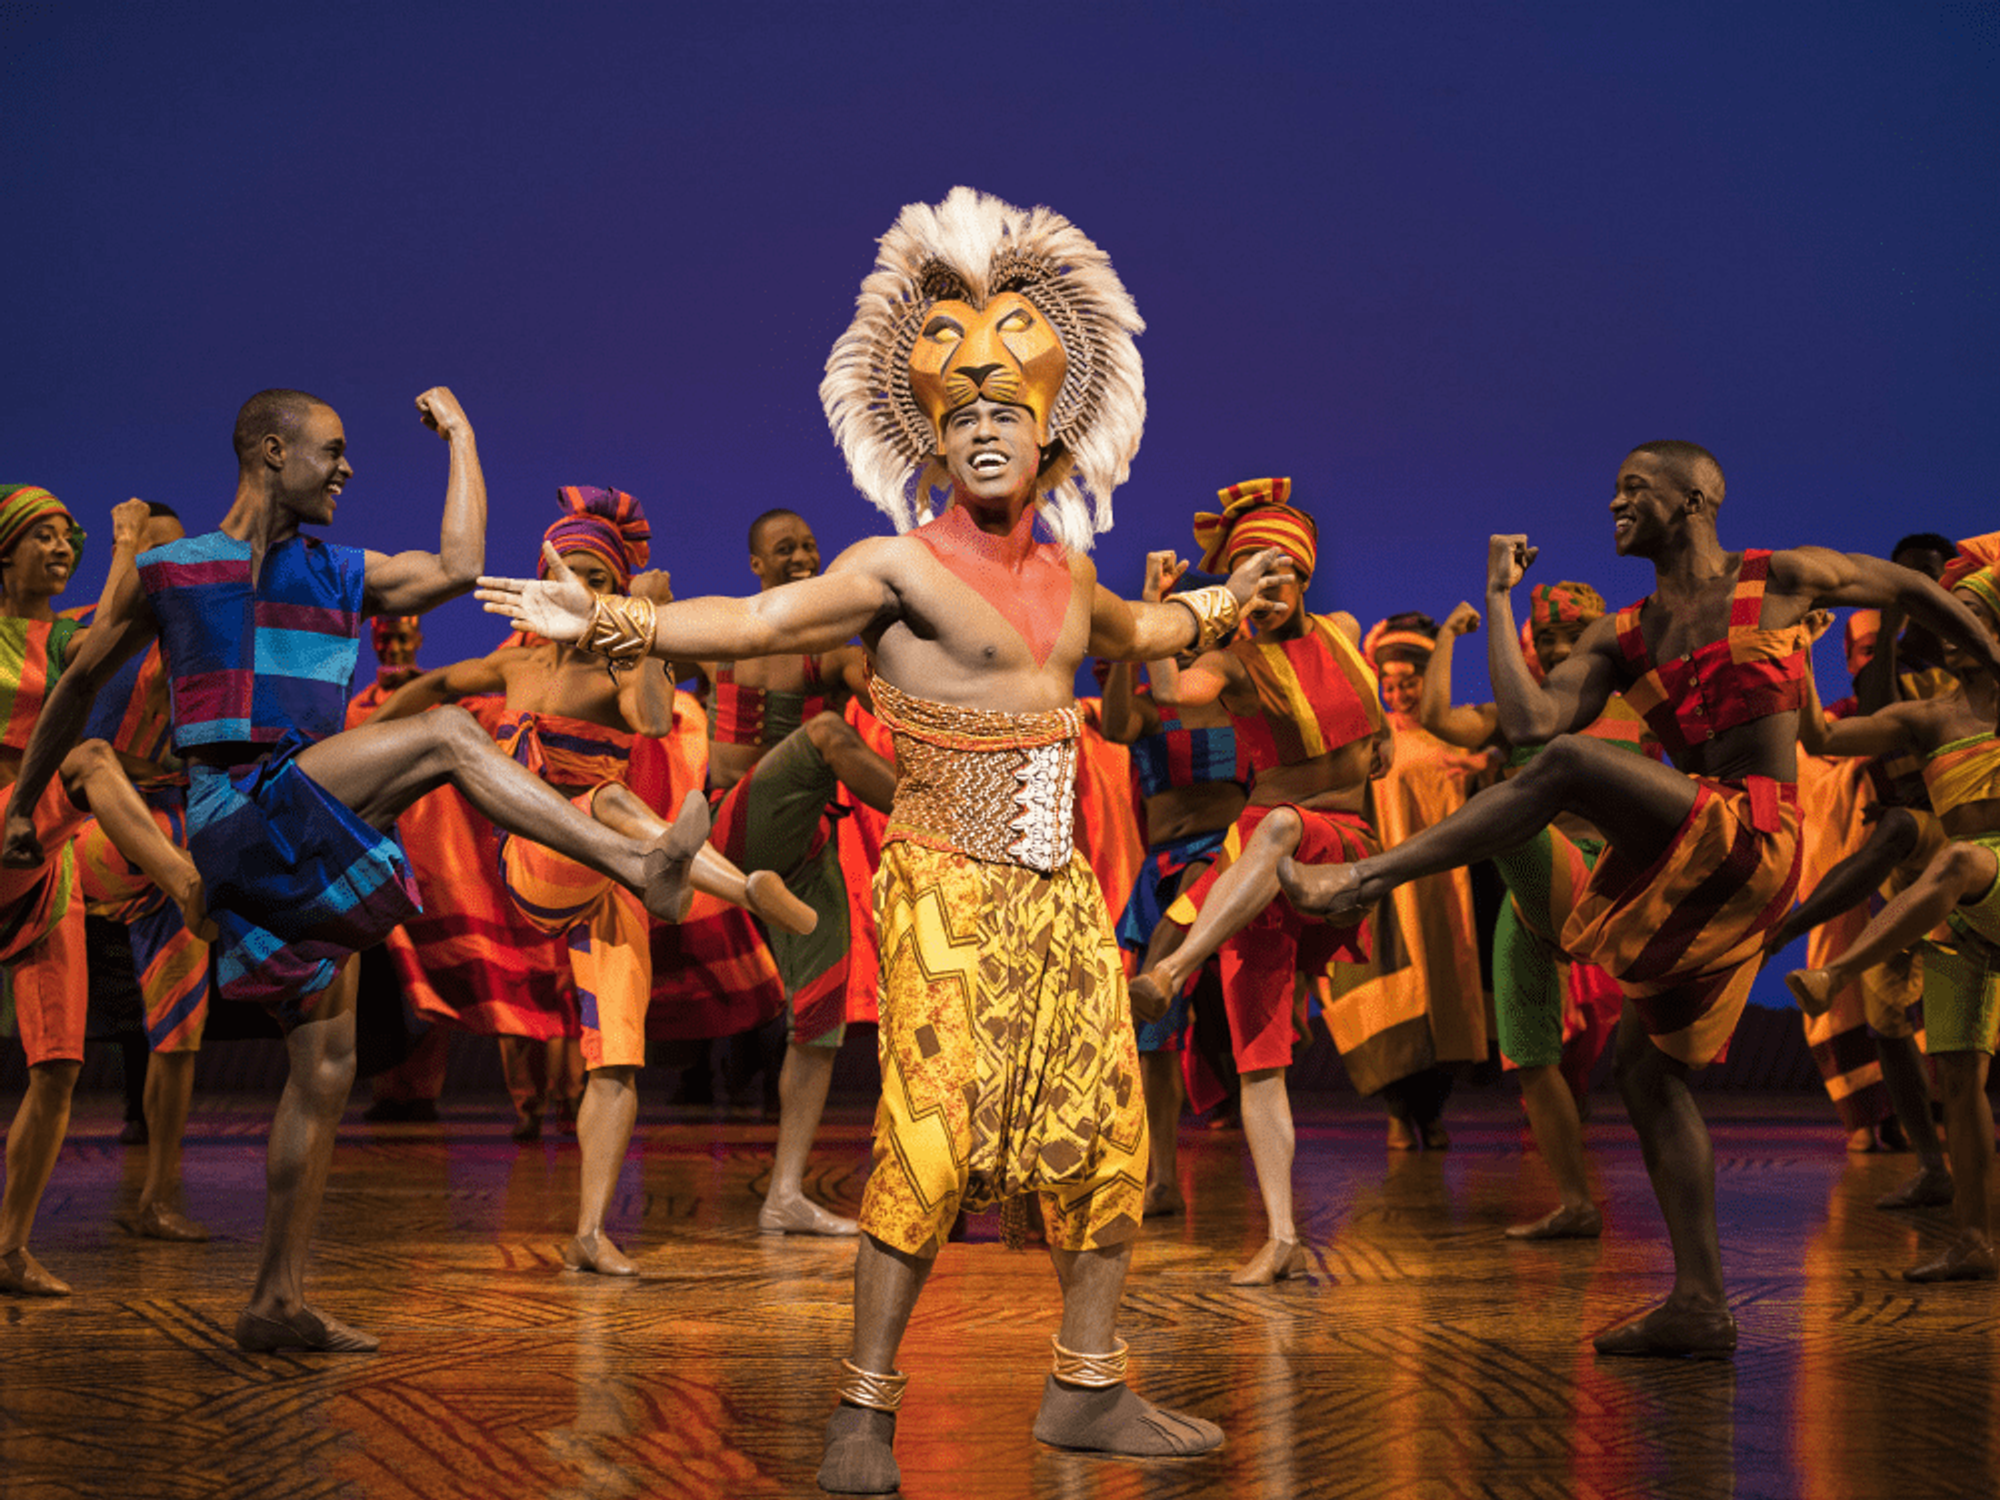 Gerald Ramsey in The Lion King.